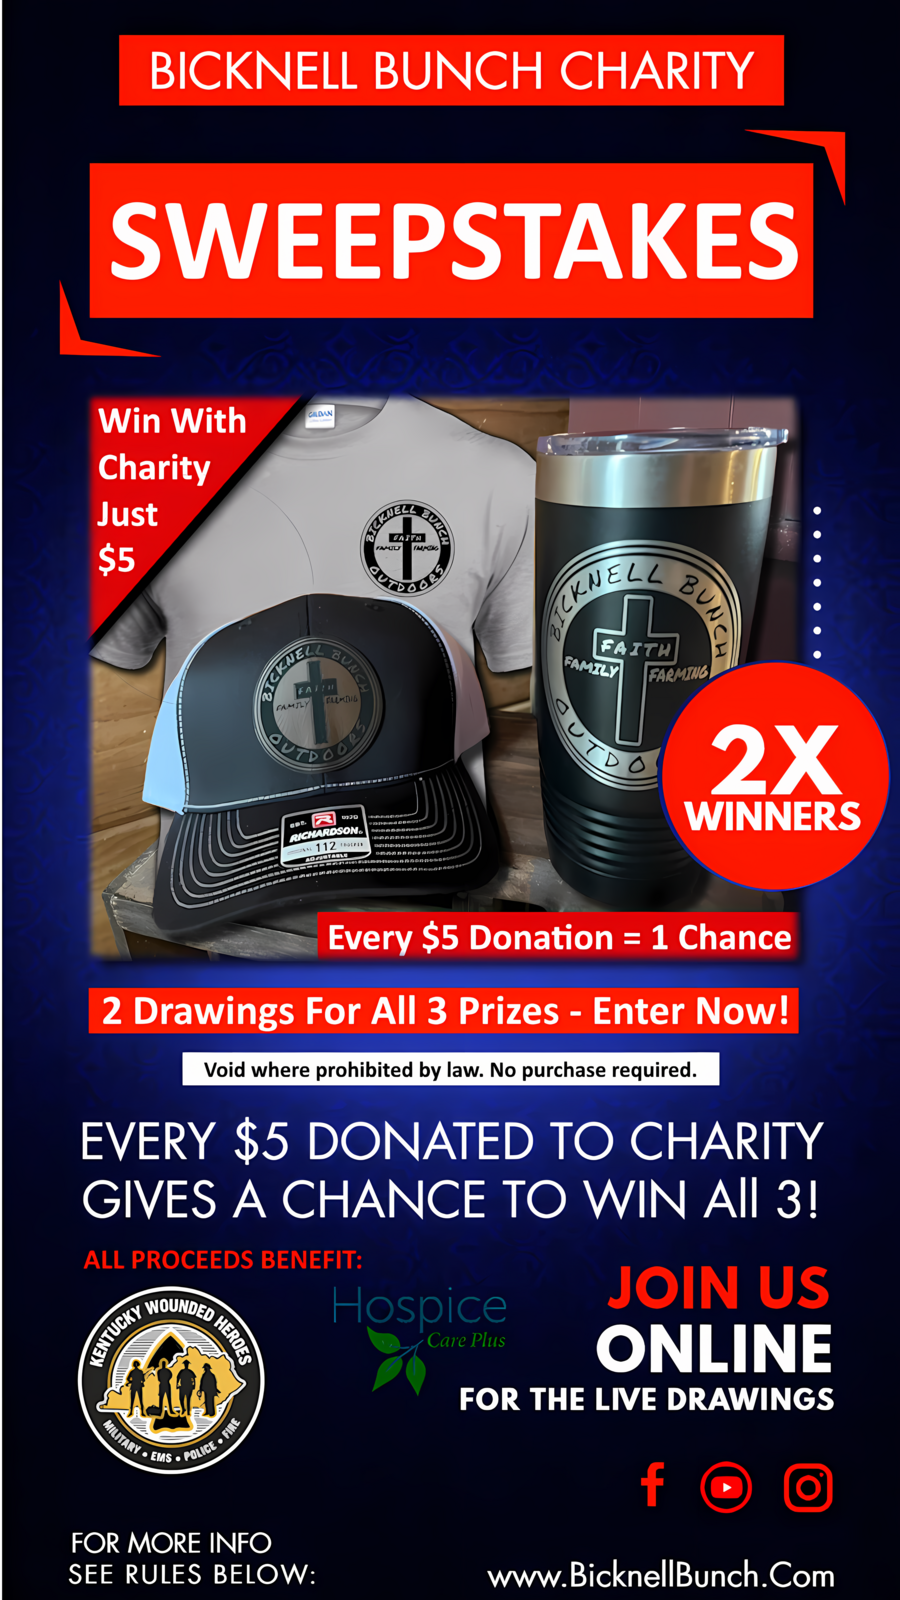 Bicknell Bunch Charity Sweepstakes